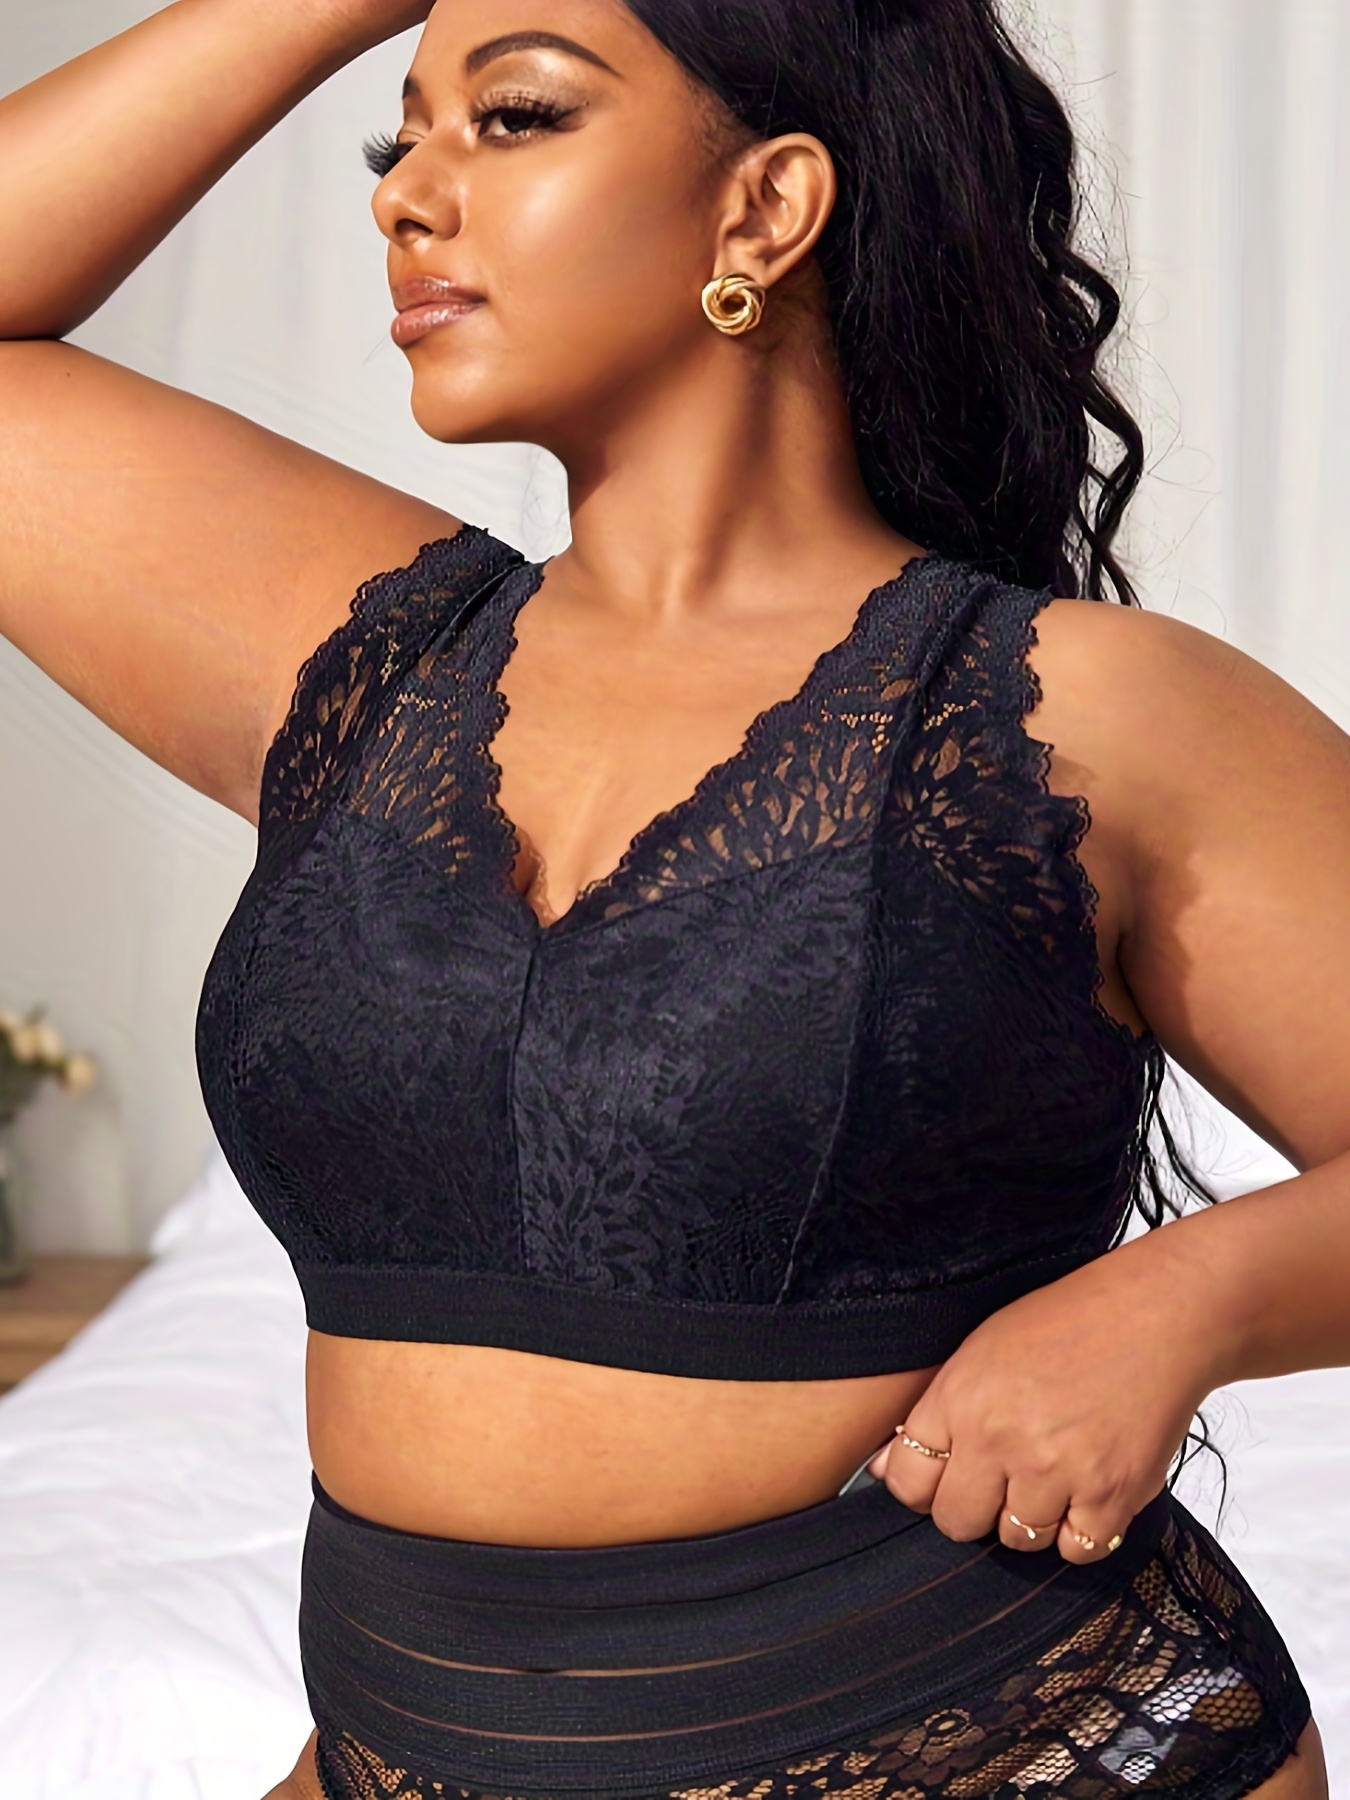 Plus Size Women Scalloped Lace Bra Embroidery Floral Bralette